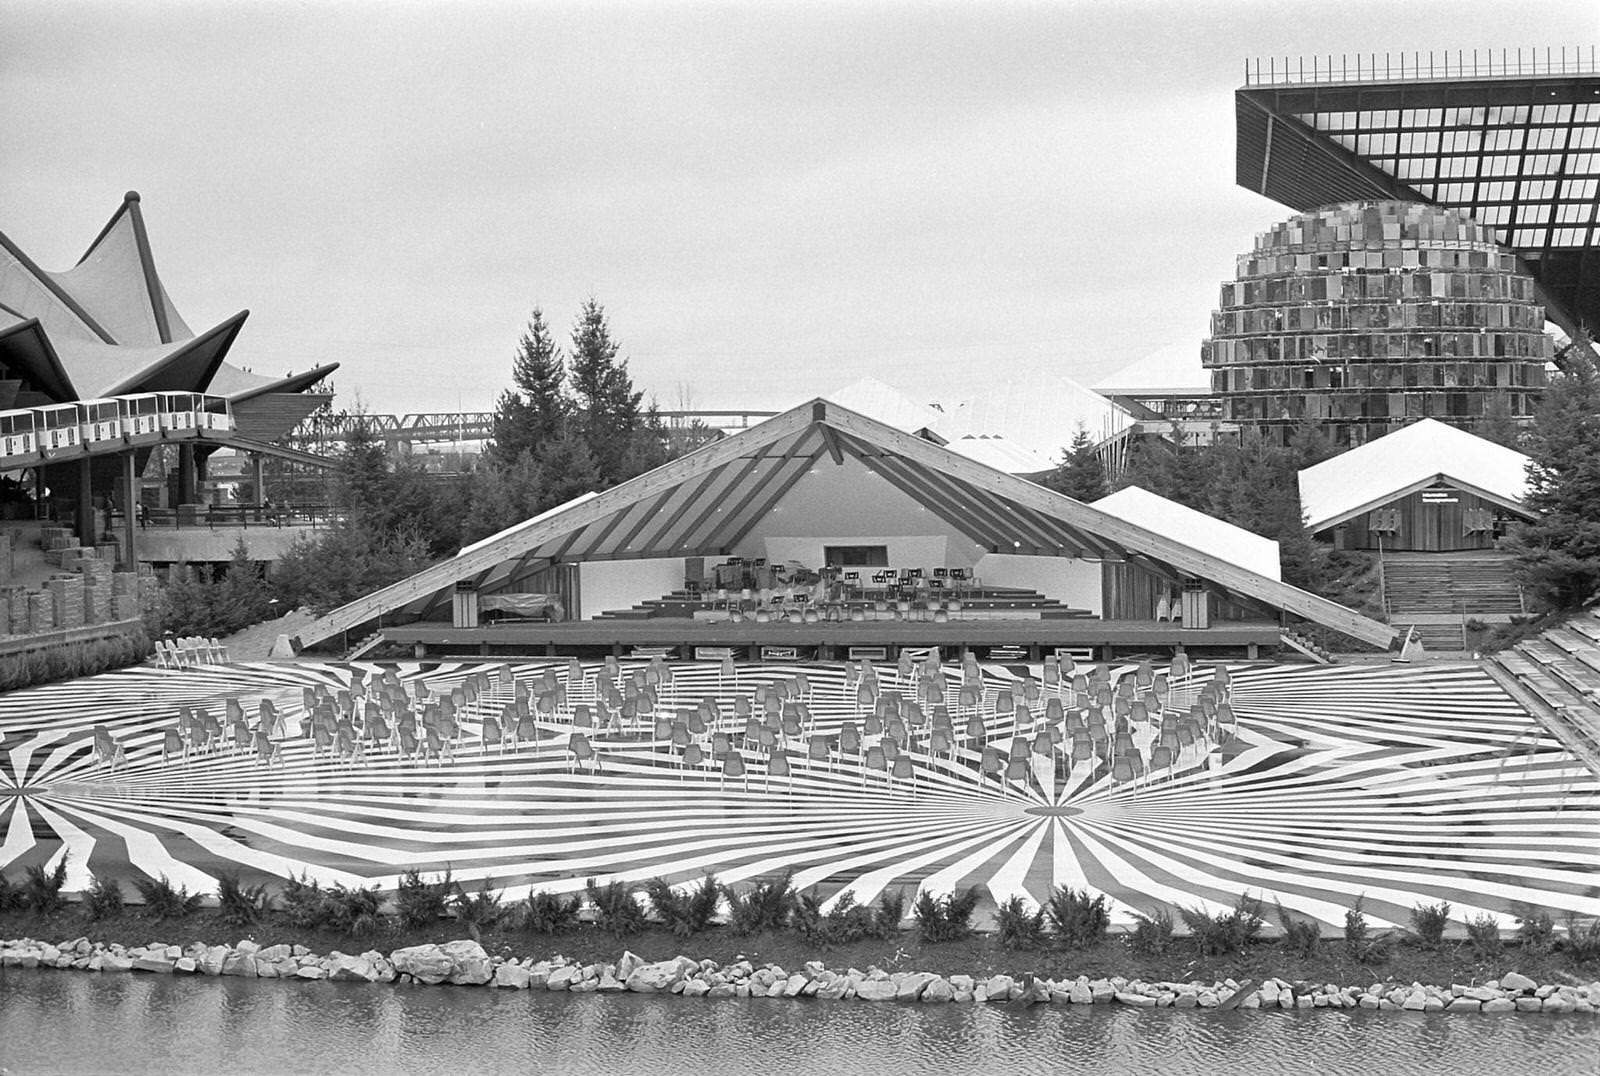 Exhibition grounds of the Expo, 1967